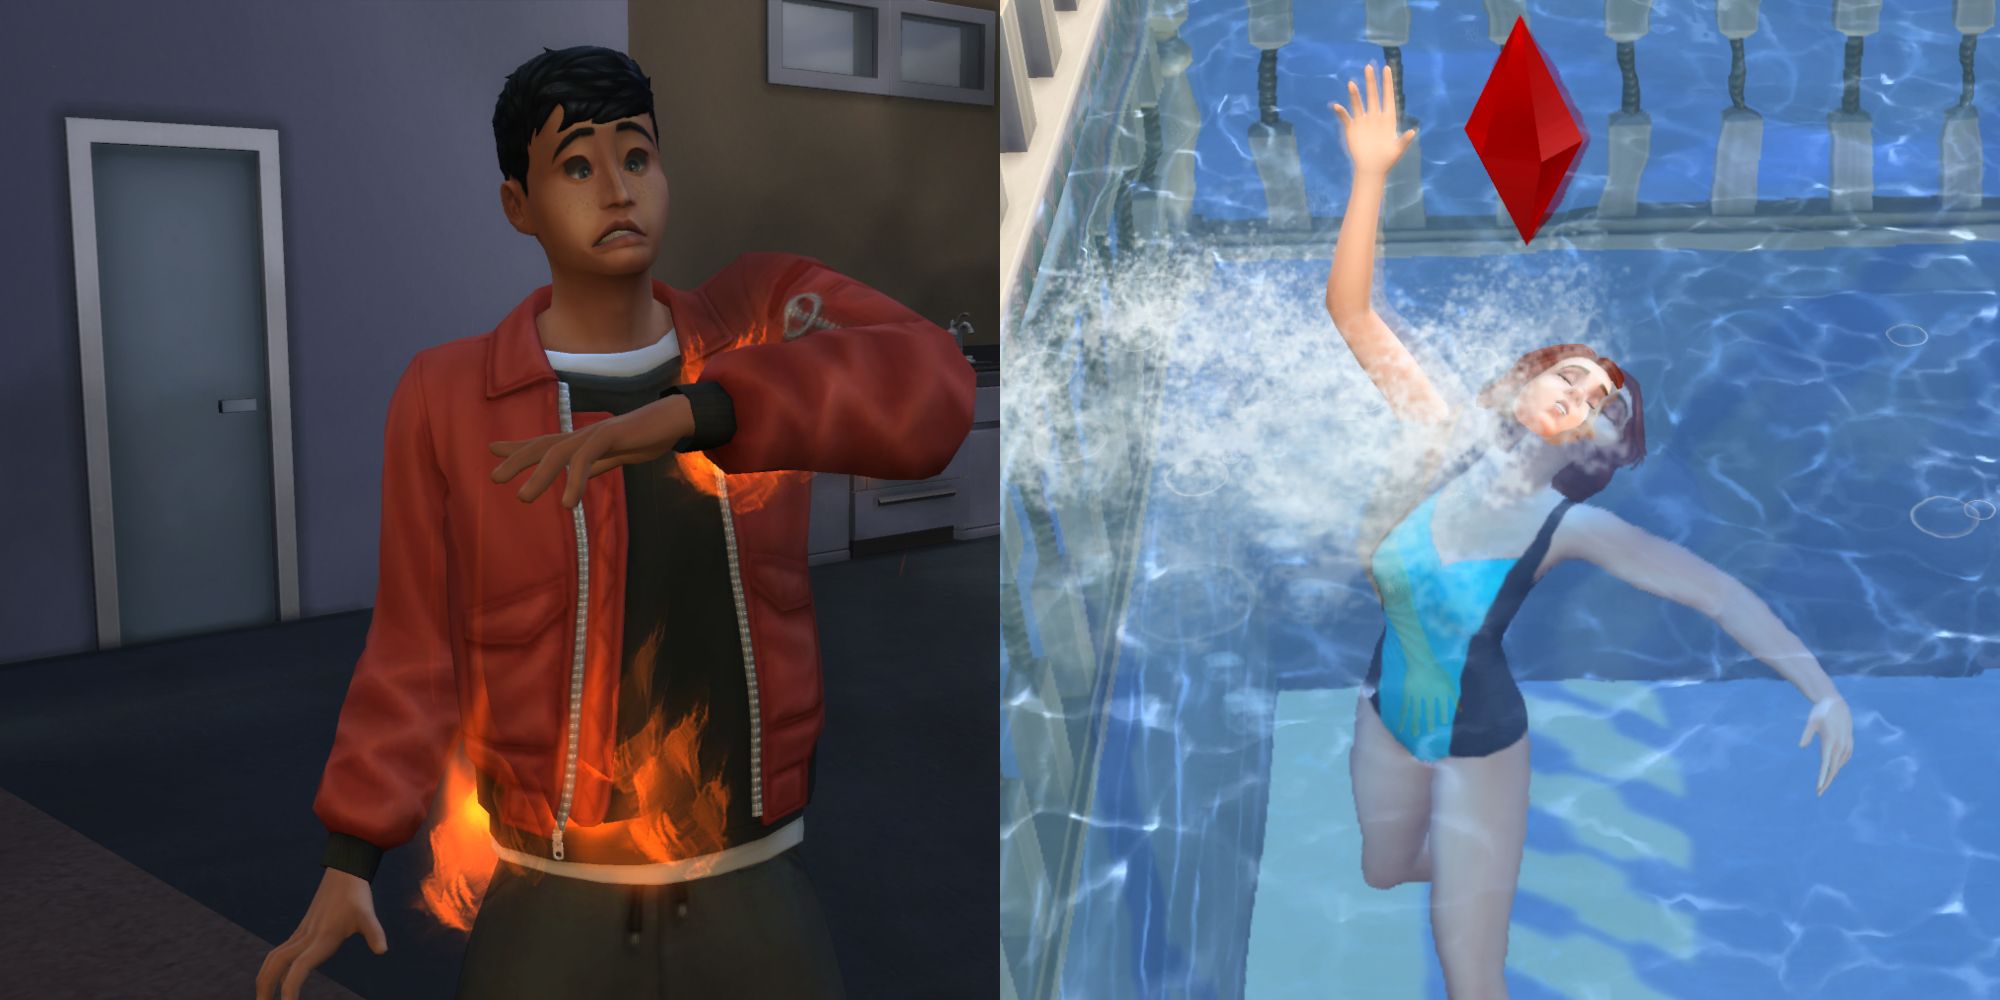 At the hands of an evil Sim and player, one Sim is burning to death while the other one drowns